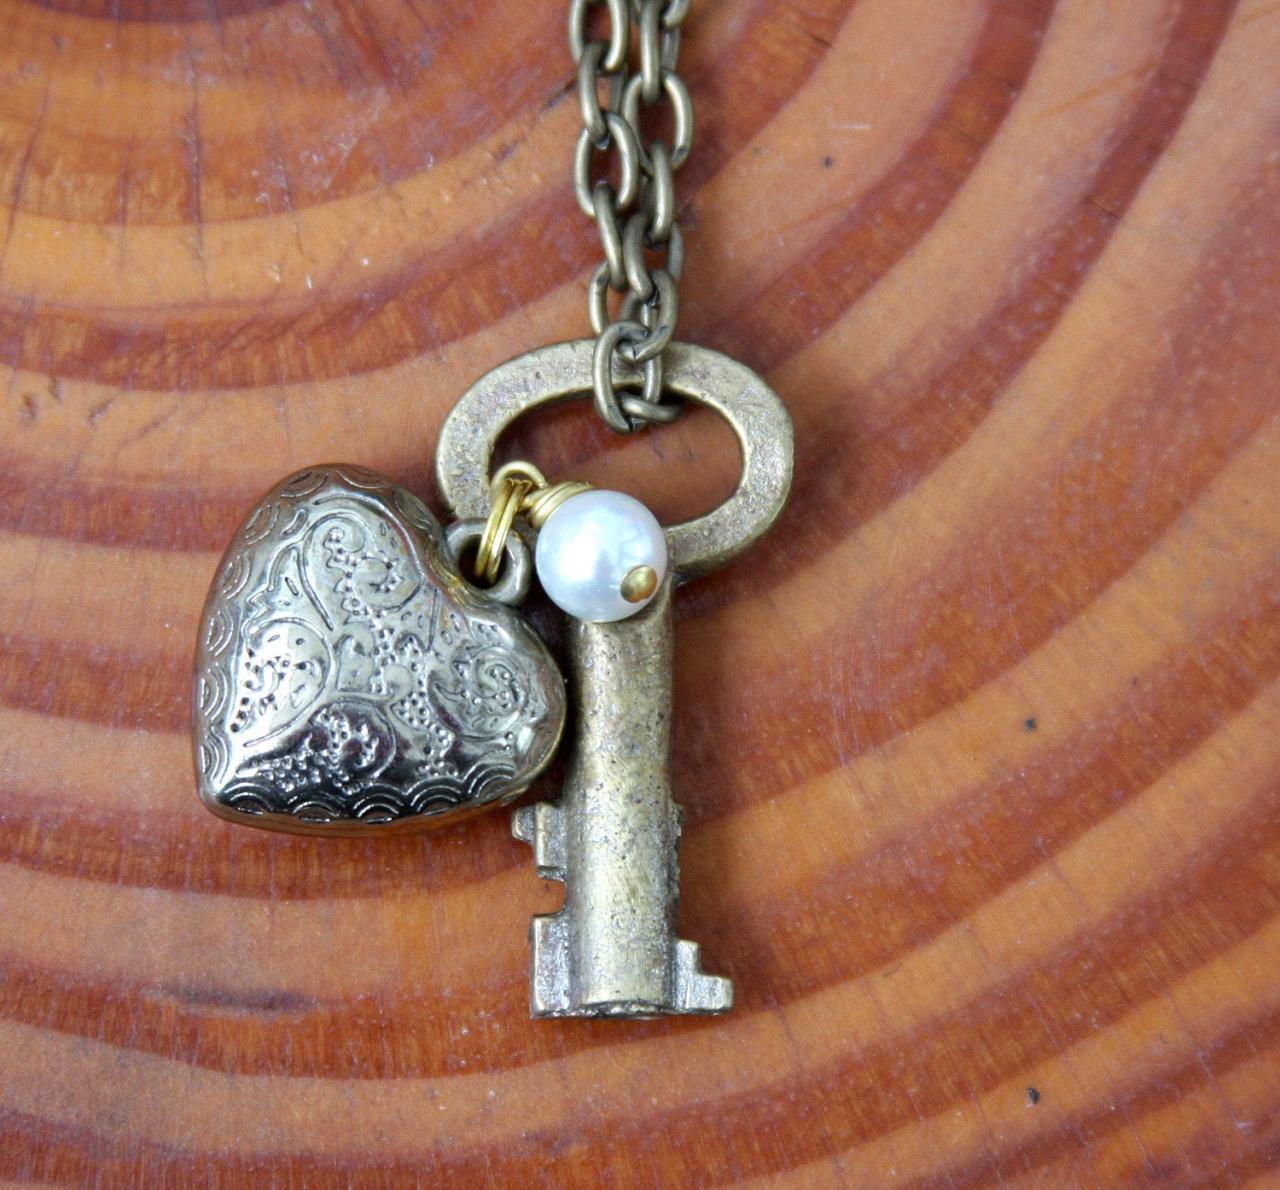 Vintage Key Necklace With Heart And Pearl, Necklaces For Women Brass Skeleton Key Pendant, Key To Heart Necklace, Valentine's Gift For